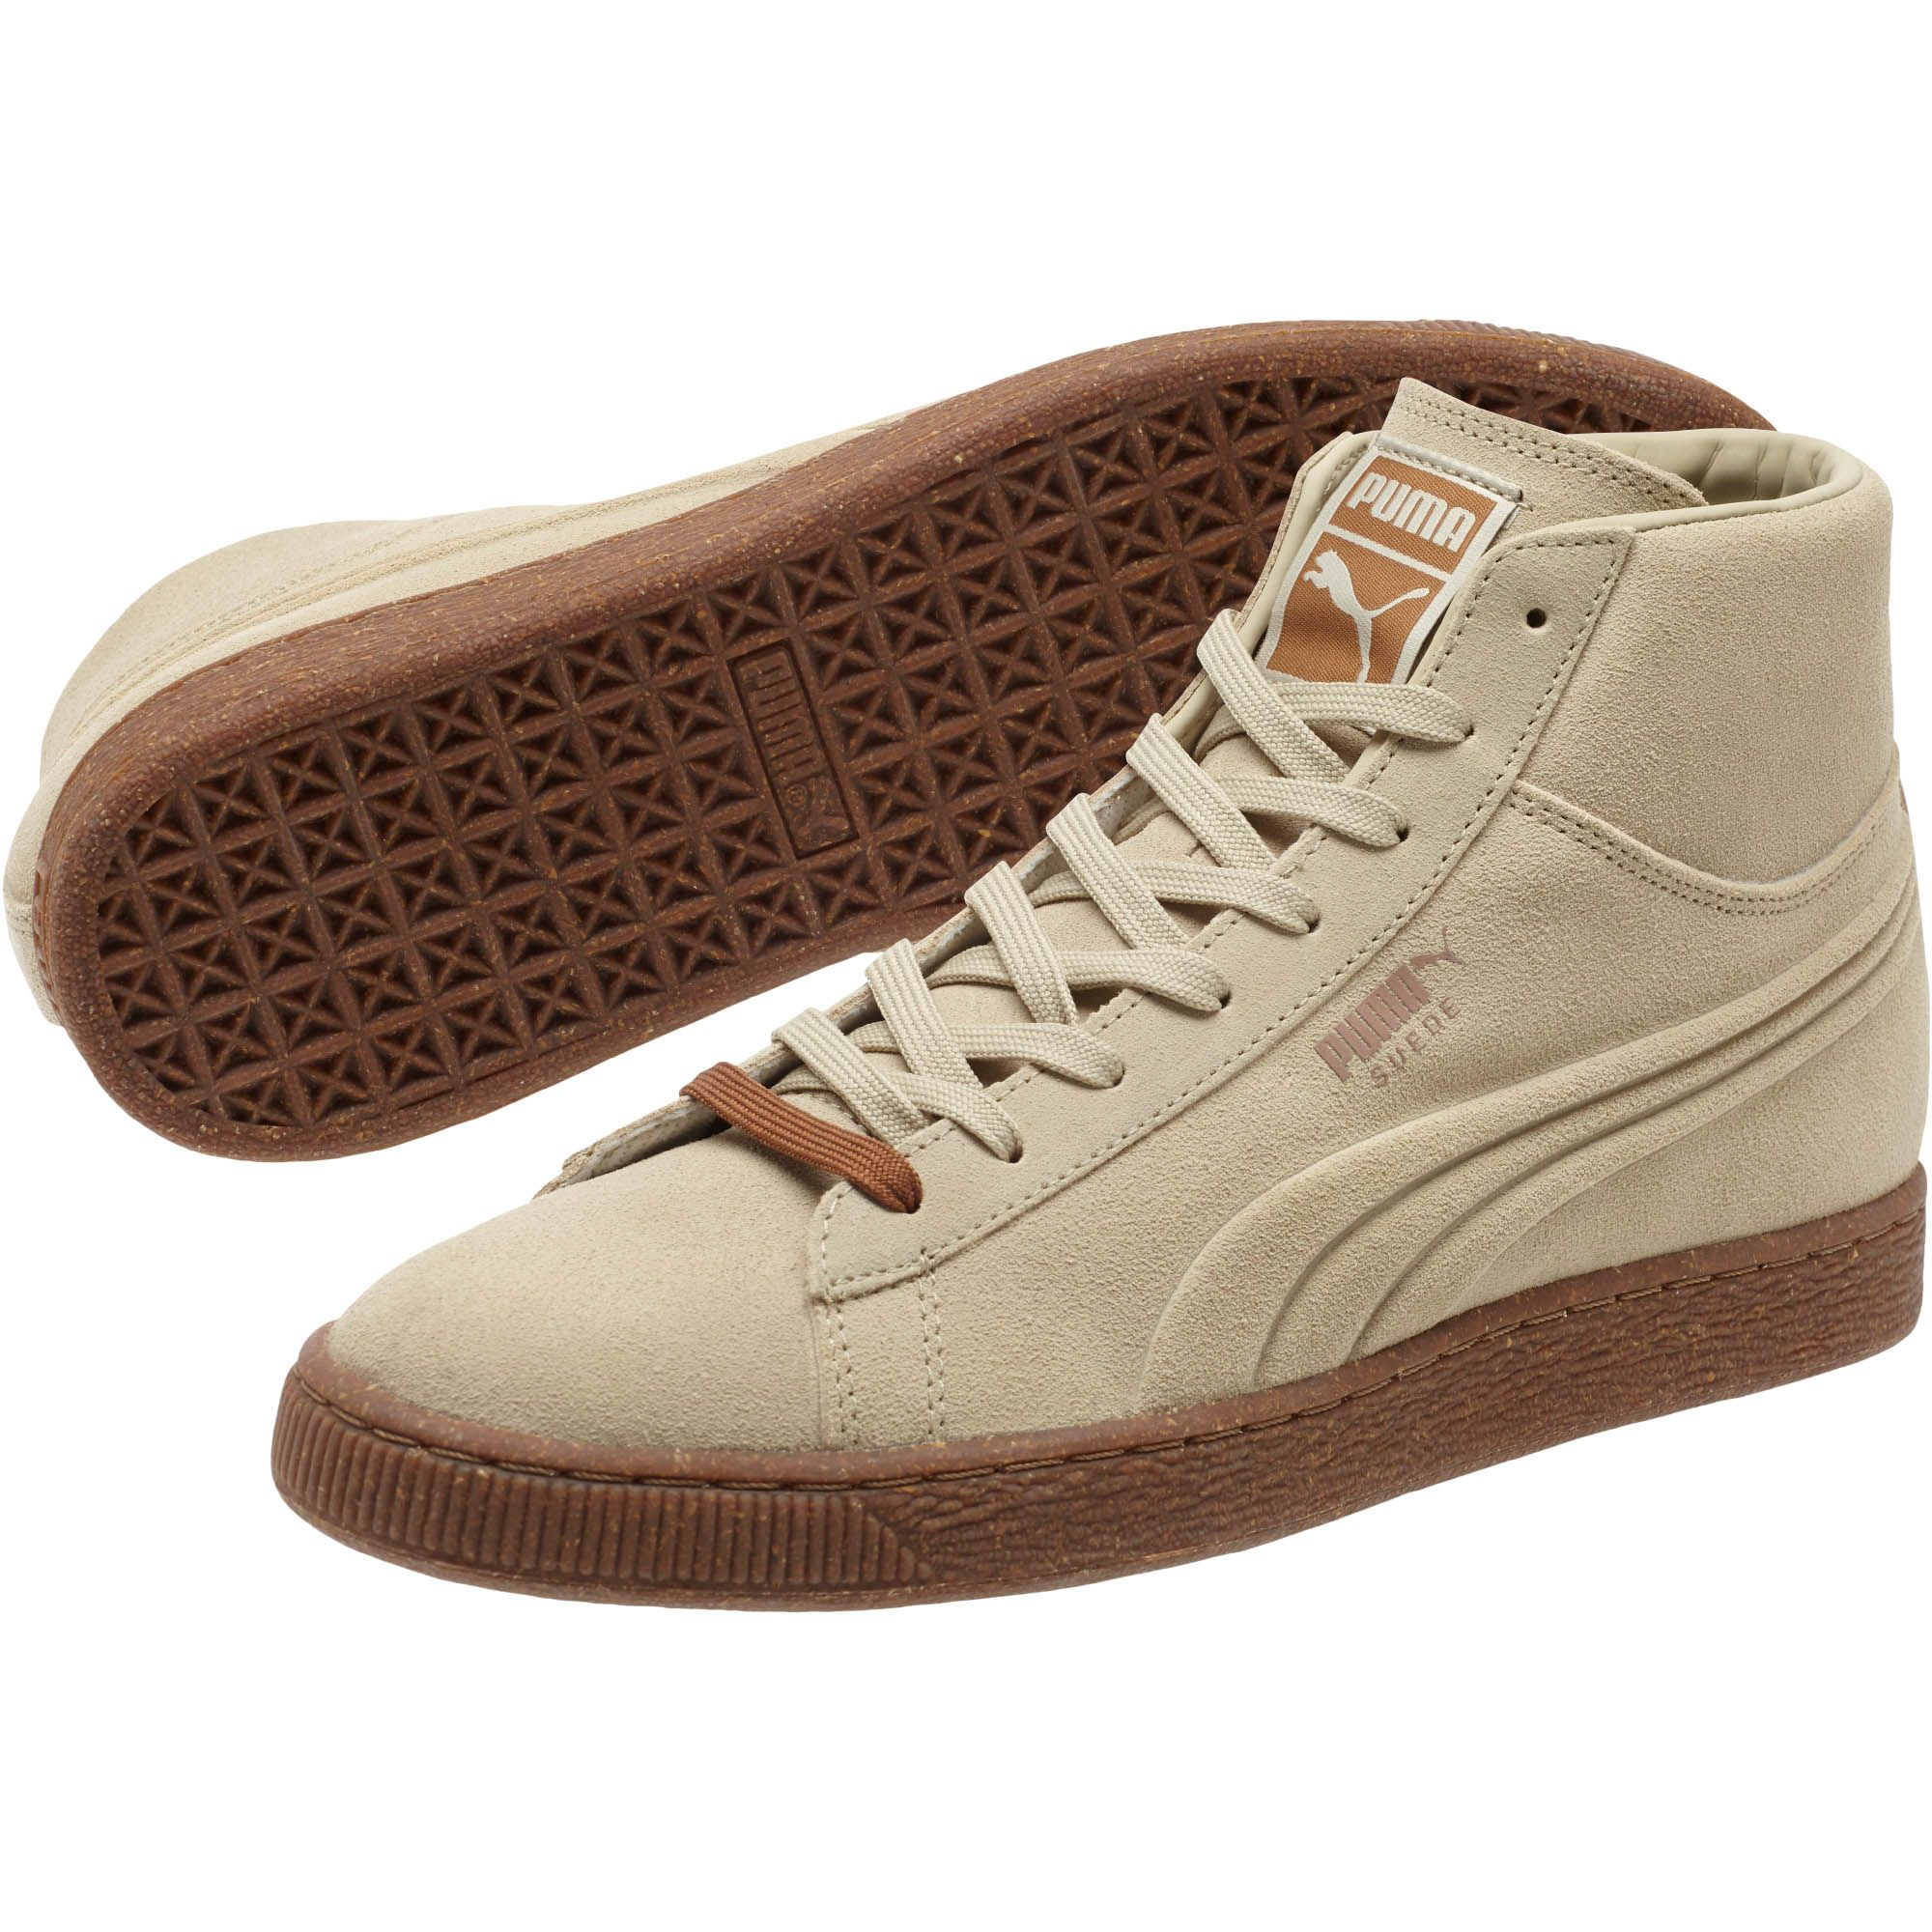 PUMA Suede Embossed Mixed Rubber Mid Men's Sneakers in Brown for Men - Lyst